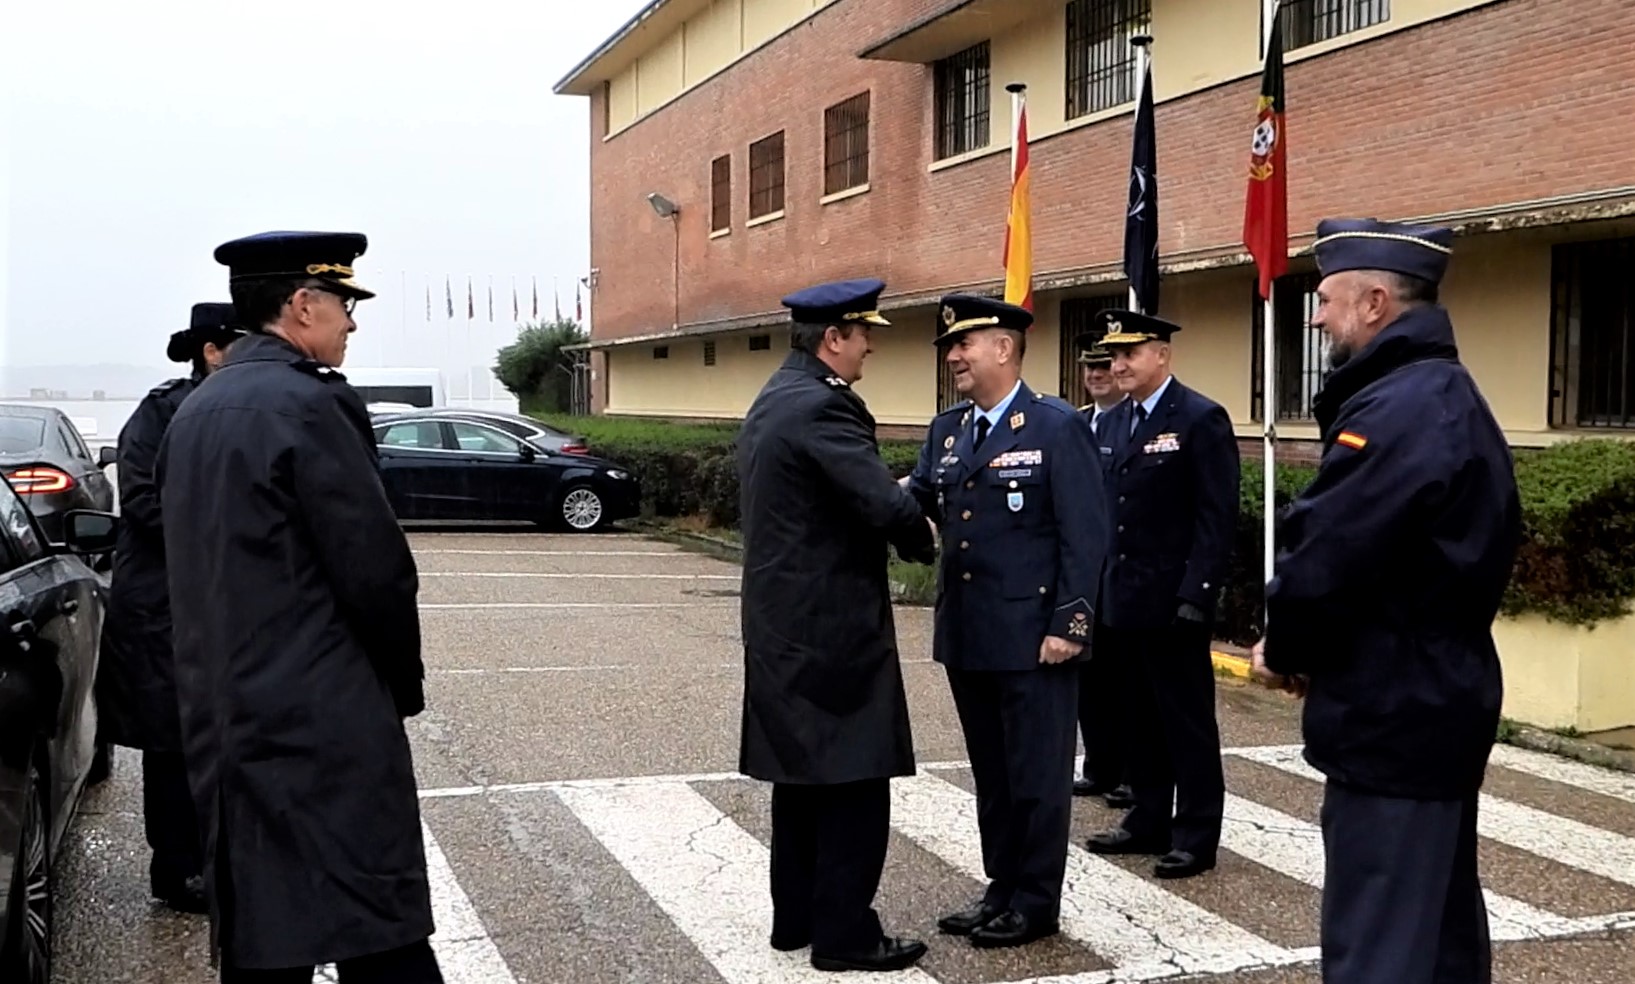 Arrival of the Chief of Staff of the Portuguese Air Force